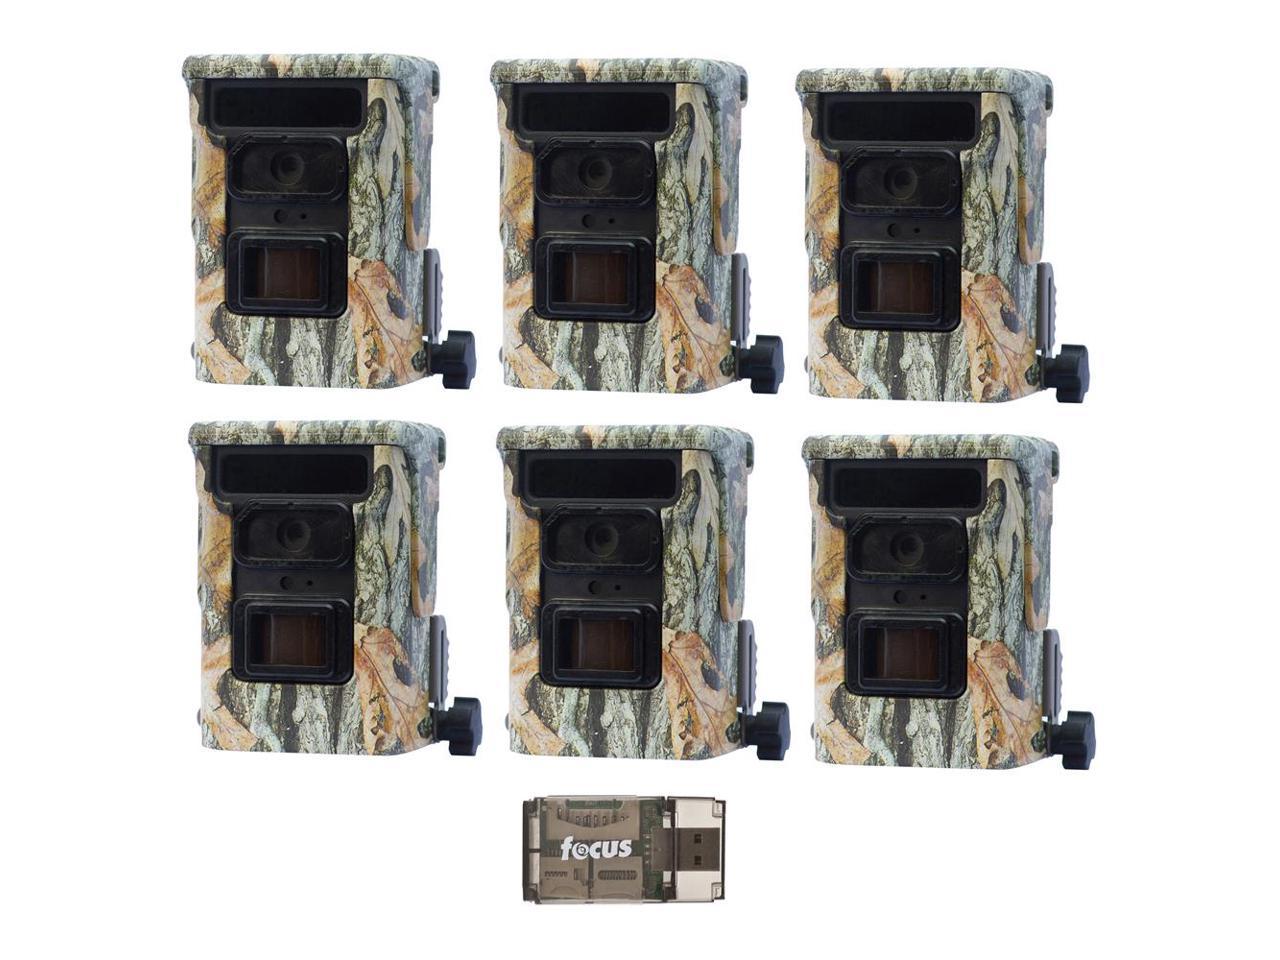 Browning Defender 940 20MP Trail Game Camera (Camo, 6) and Focus Reader